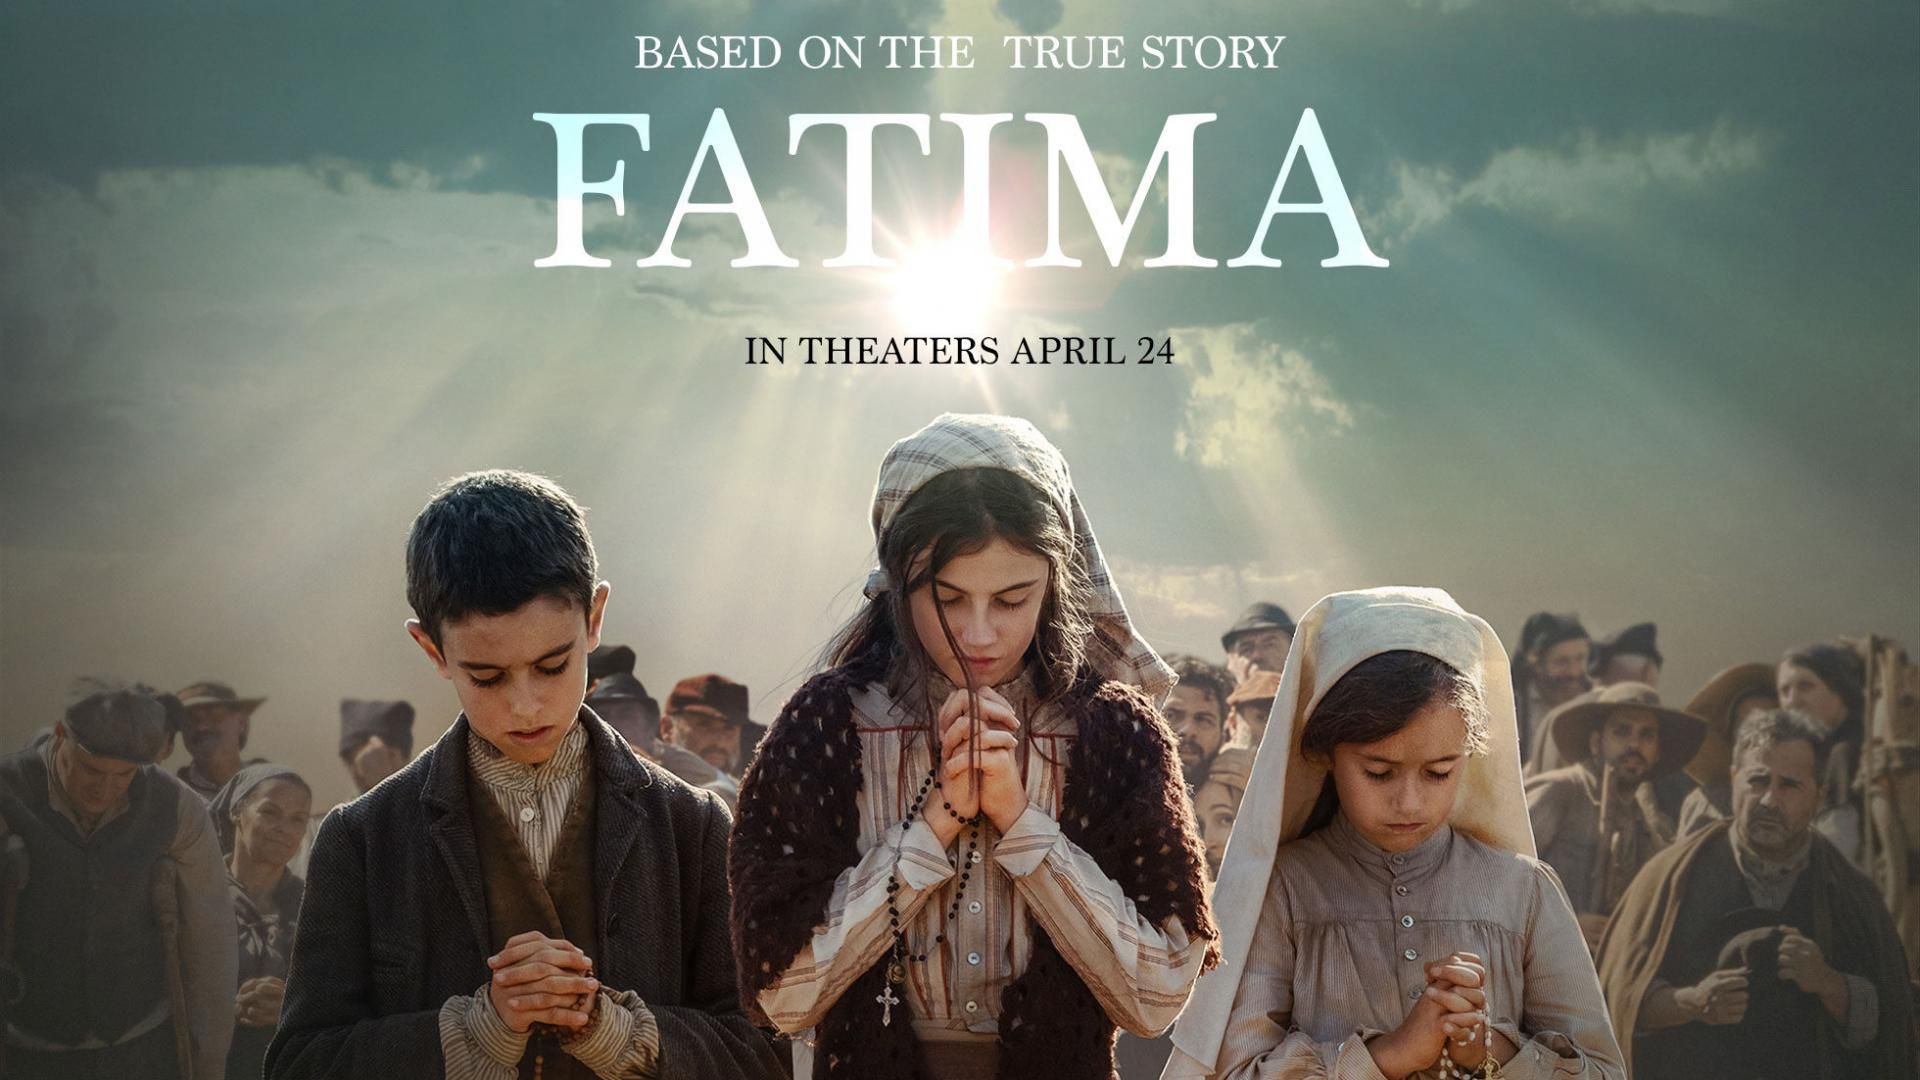 Why We Need Fatima The Movie Right Now